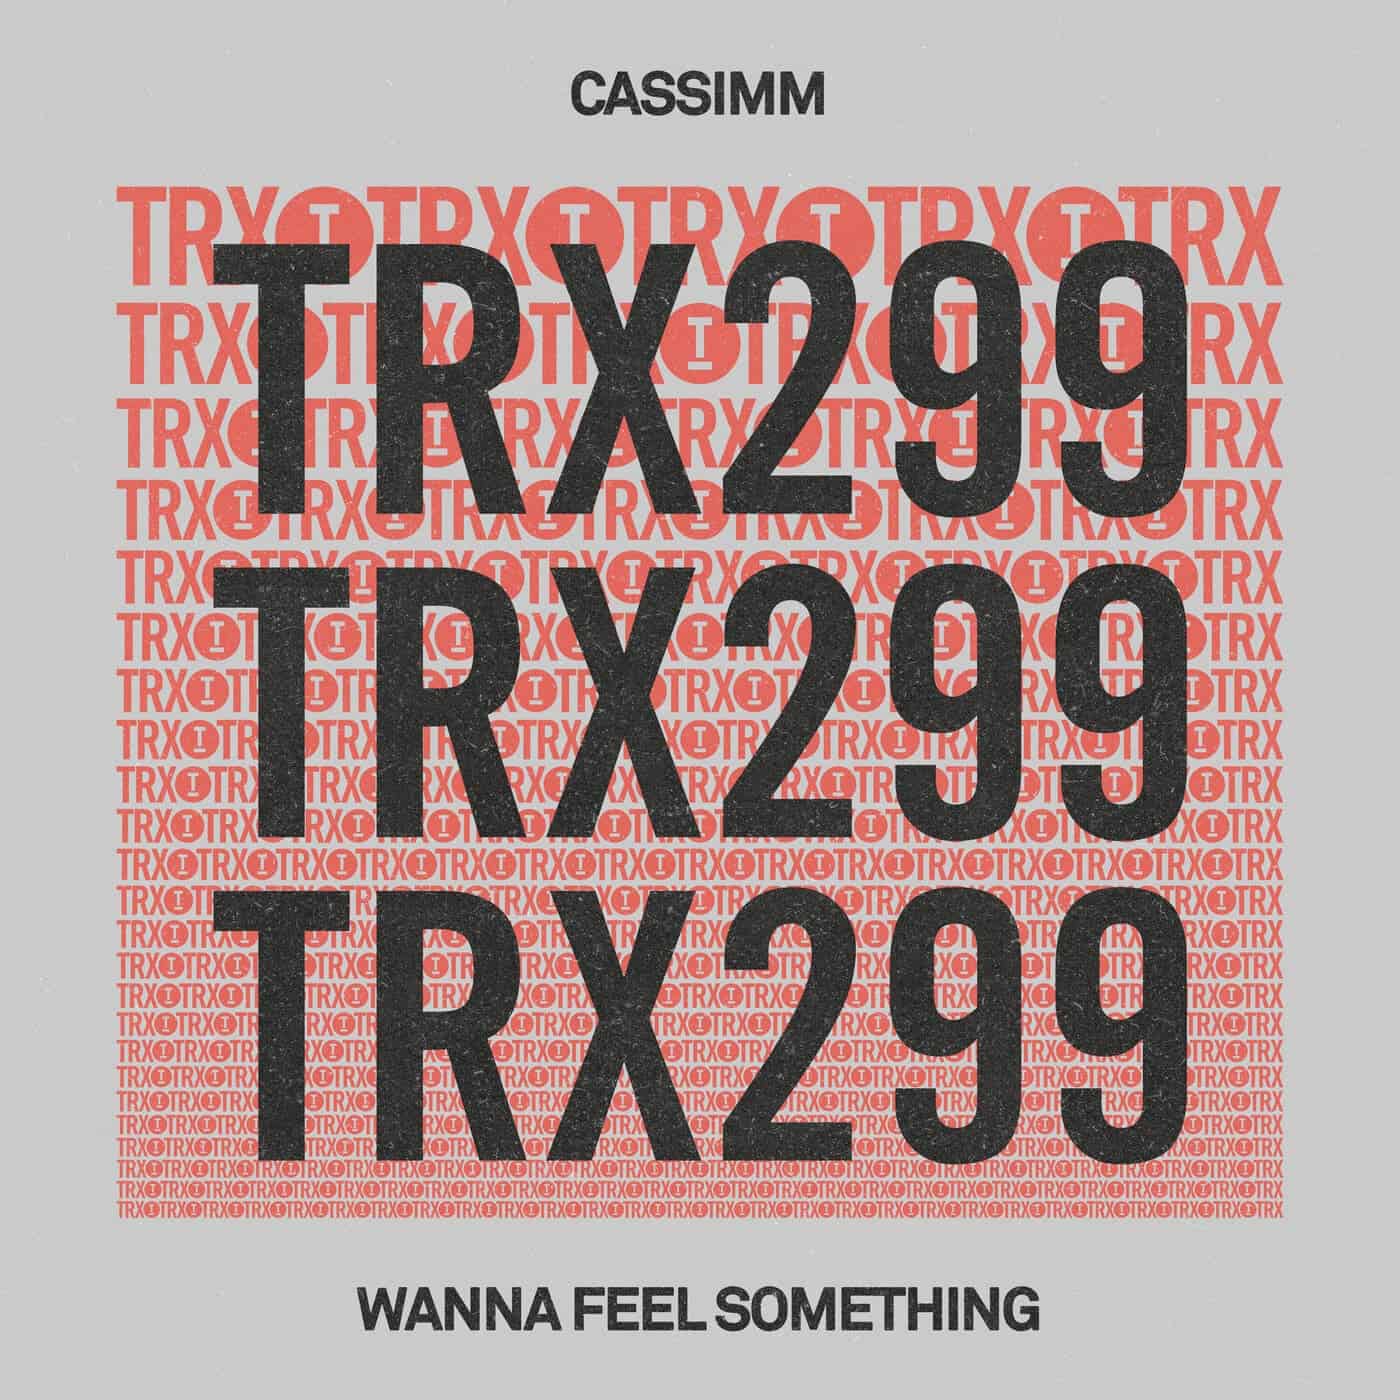 image cover: CASSIMM - Wanna Feel Something on Toolroom Trax